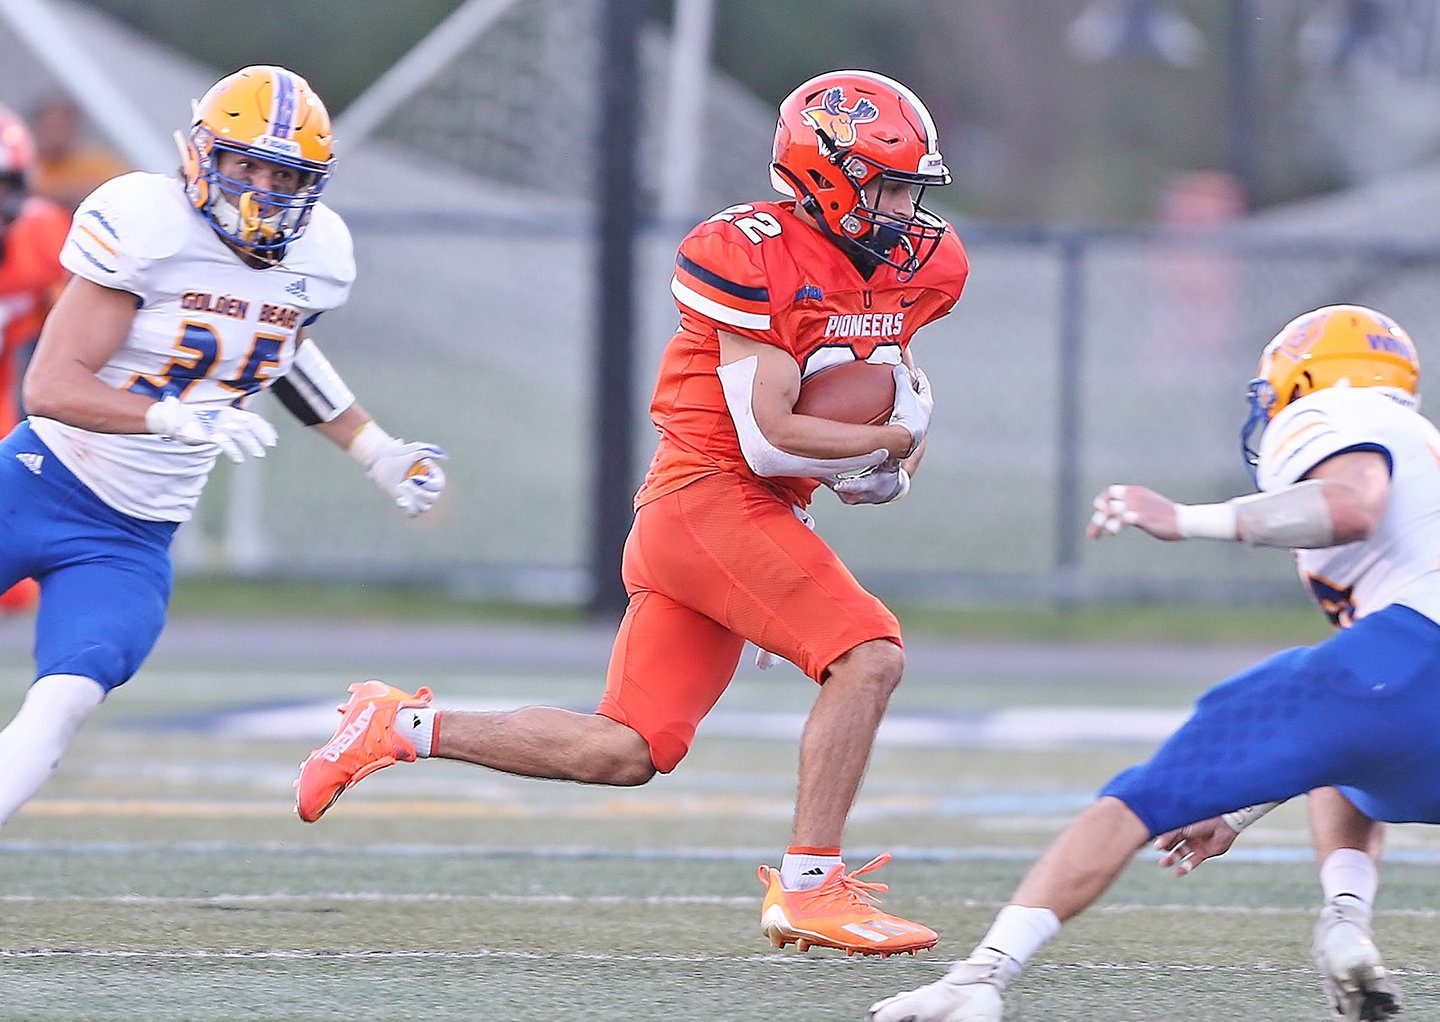 The Pioneers offense has grad wide receiver Nate Palmer who has 887 receiving yards and 11 touchdowns in 2022.